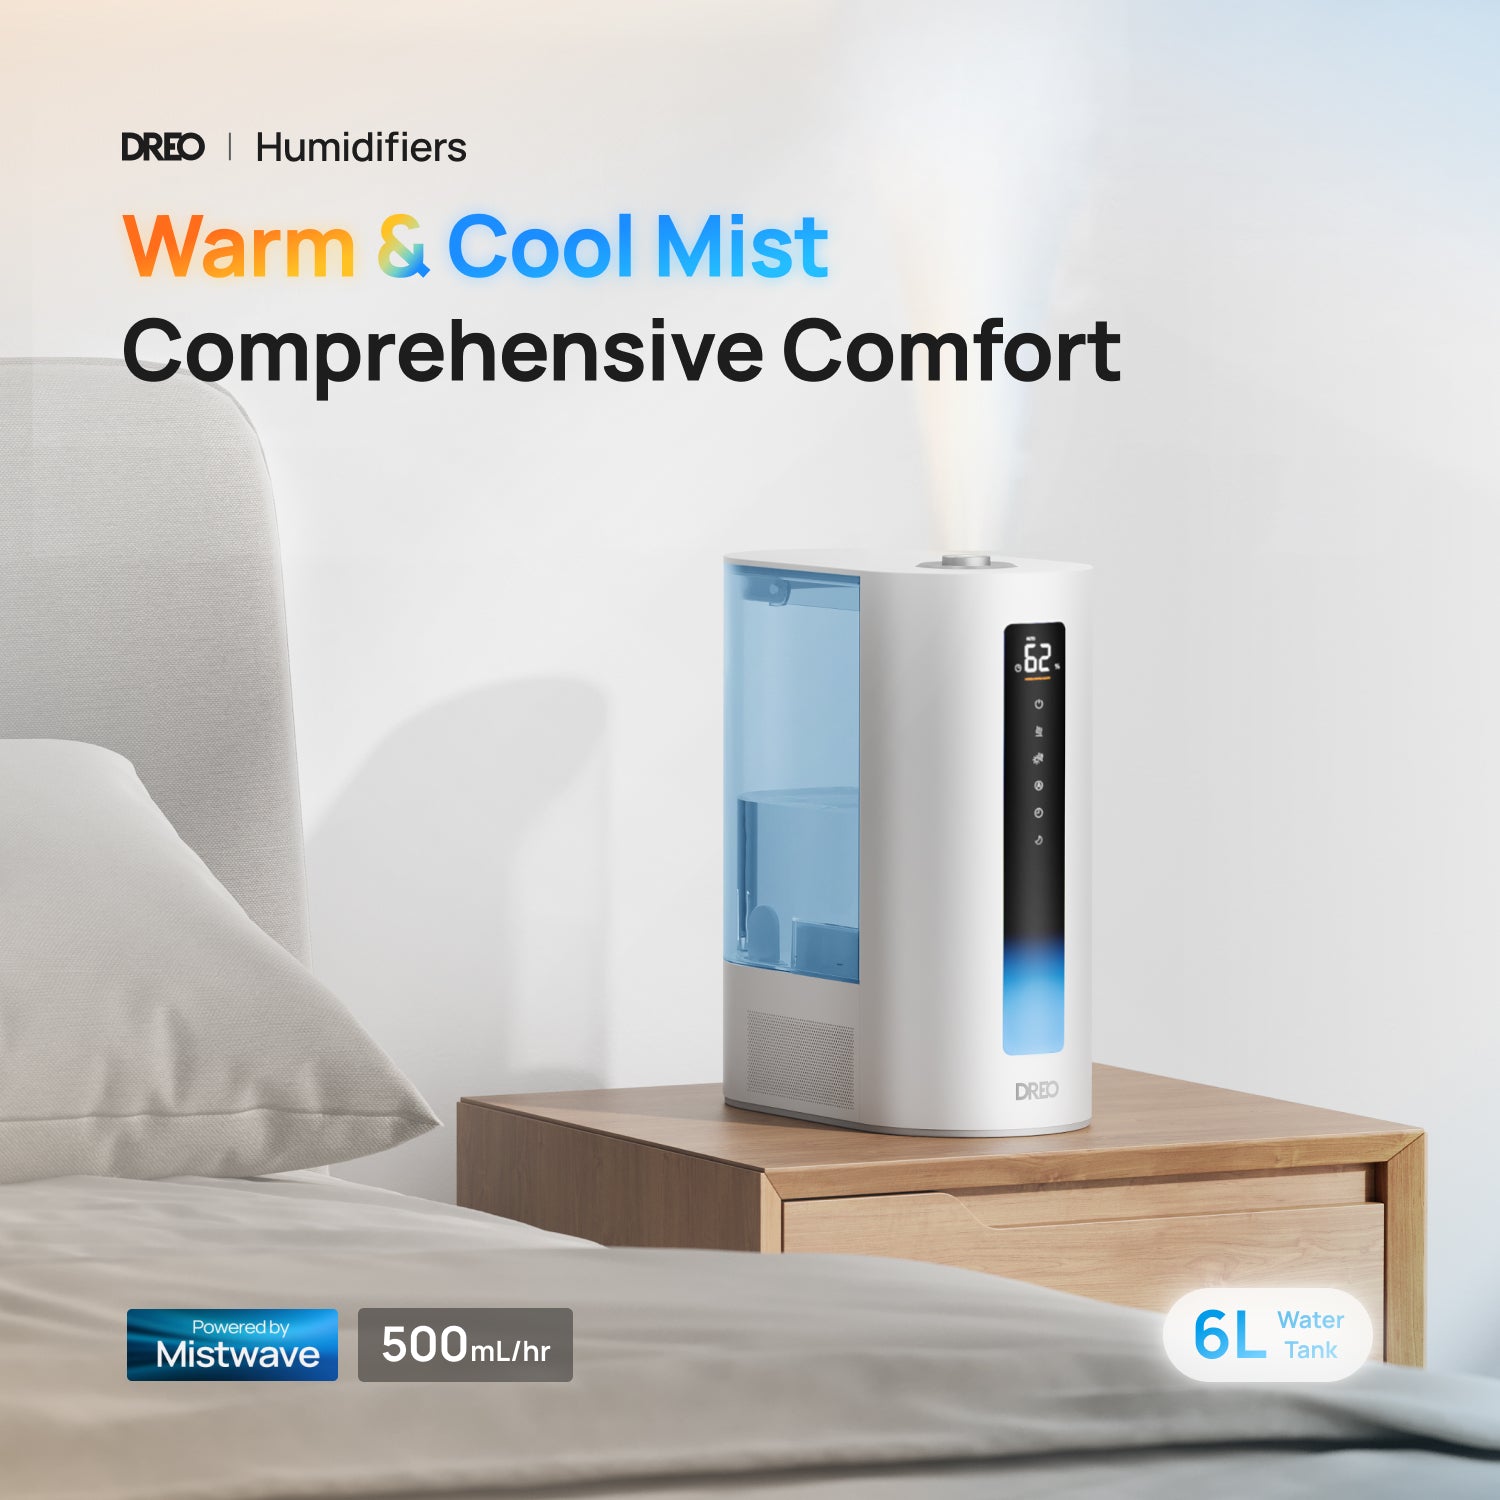 Dreo Cool & Warm Mist Humidifier with Filter, 6L Tank Top Fill Humidifier, Quiet Ultrasonic Humidifiers for Bedroom, Indicator Light, 60Hrs Routime, Precise Humidity Sensor, Dual-aromapad Tray, Blue